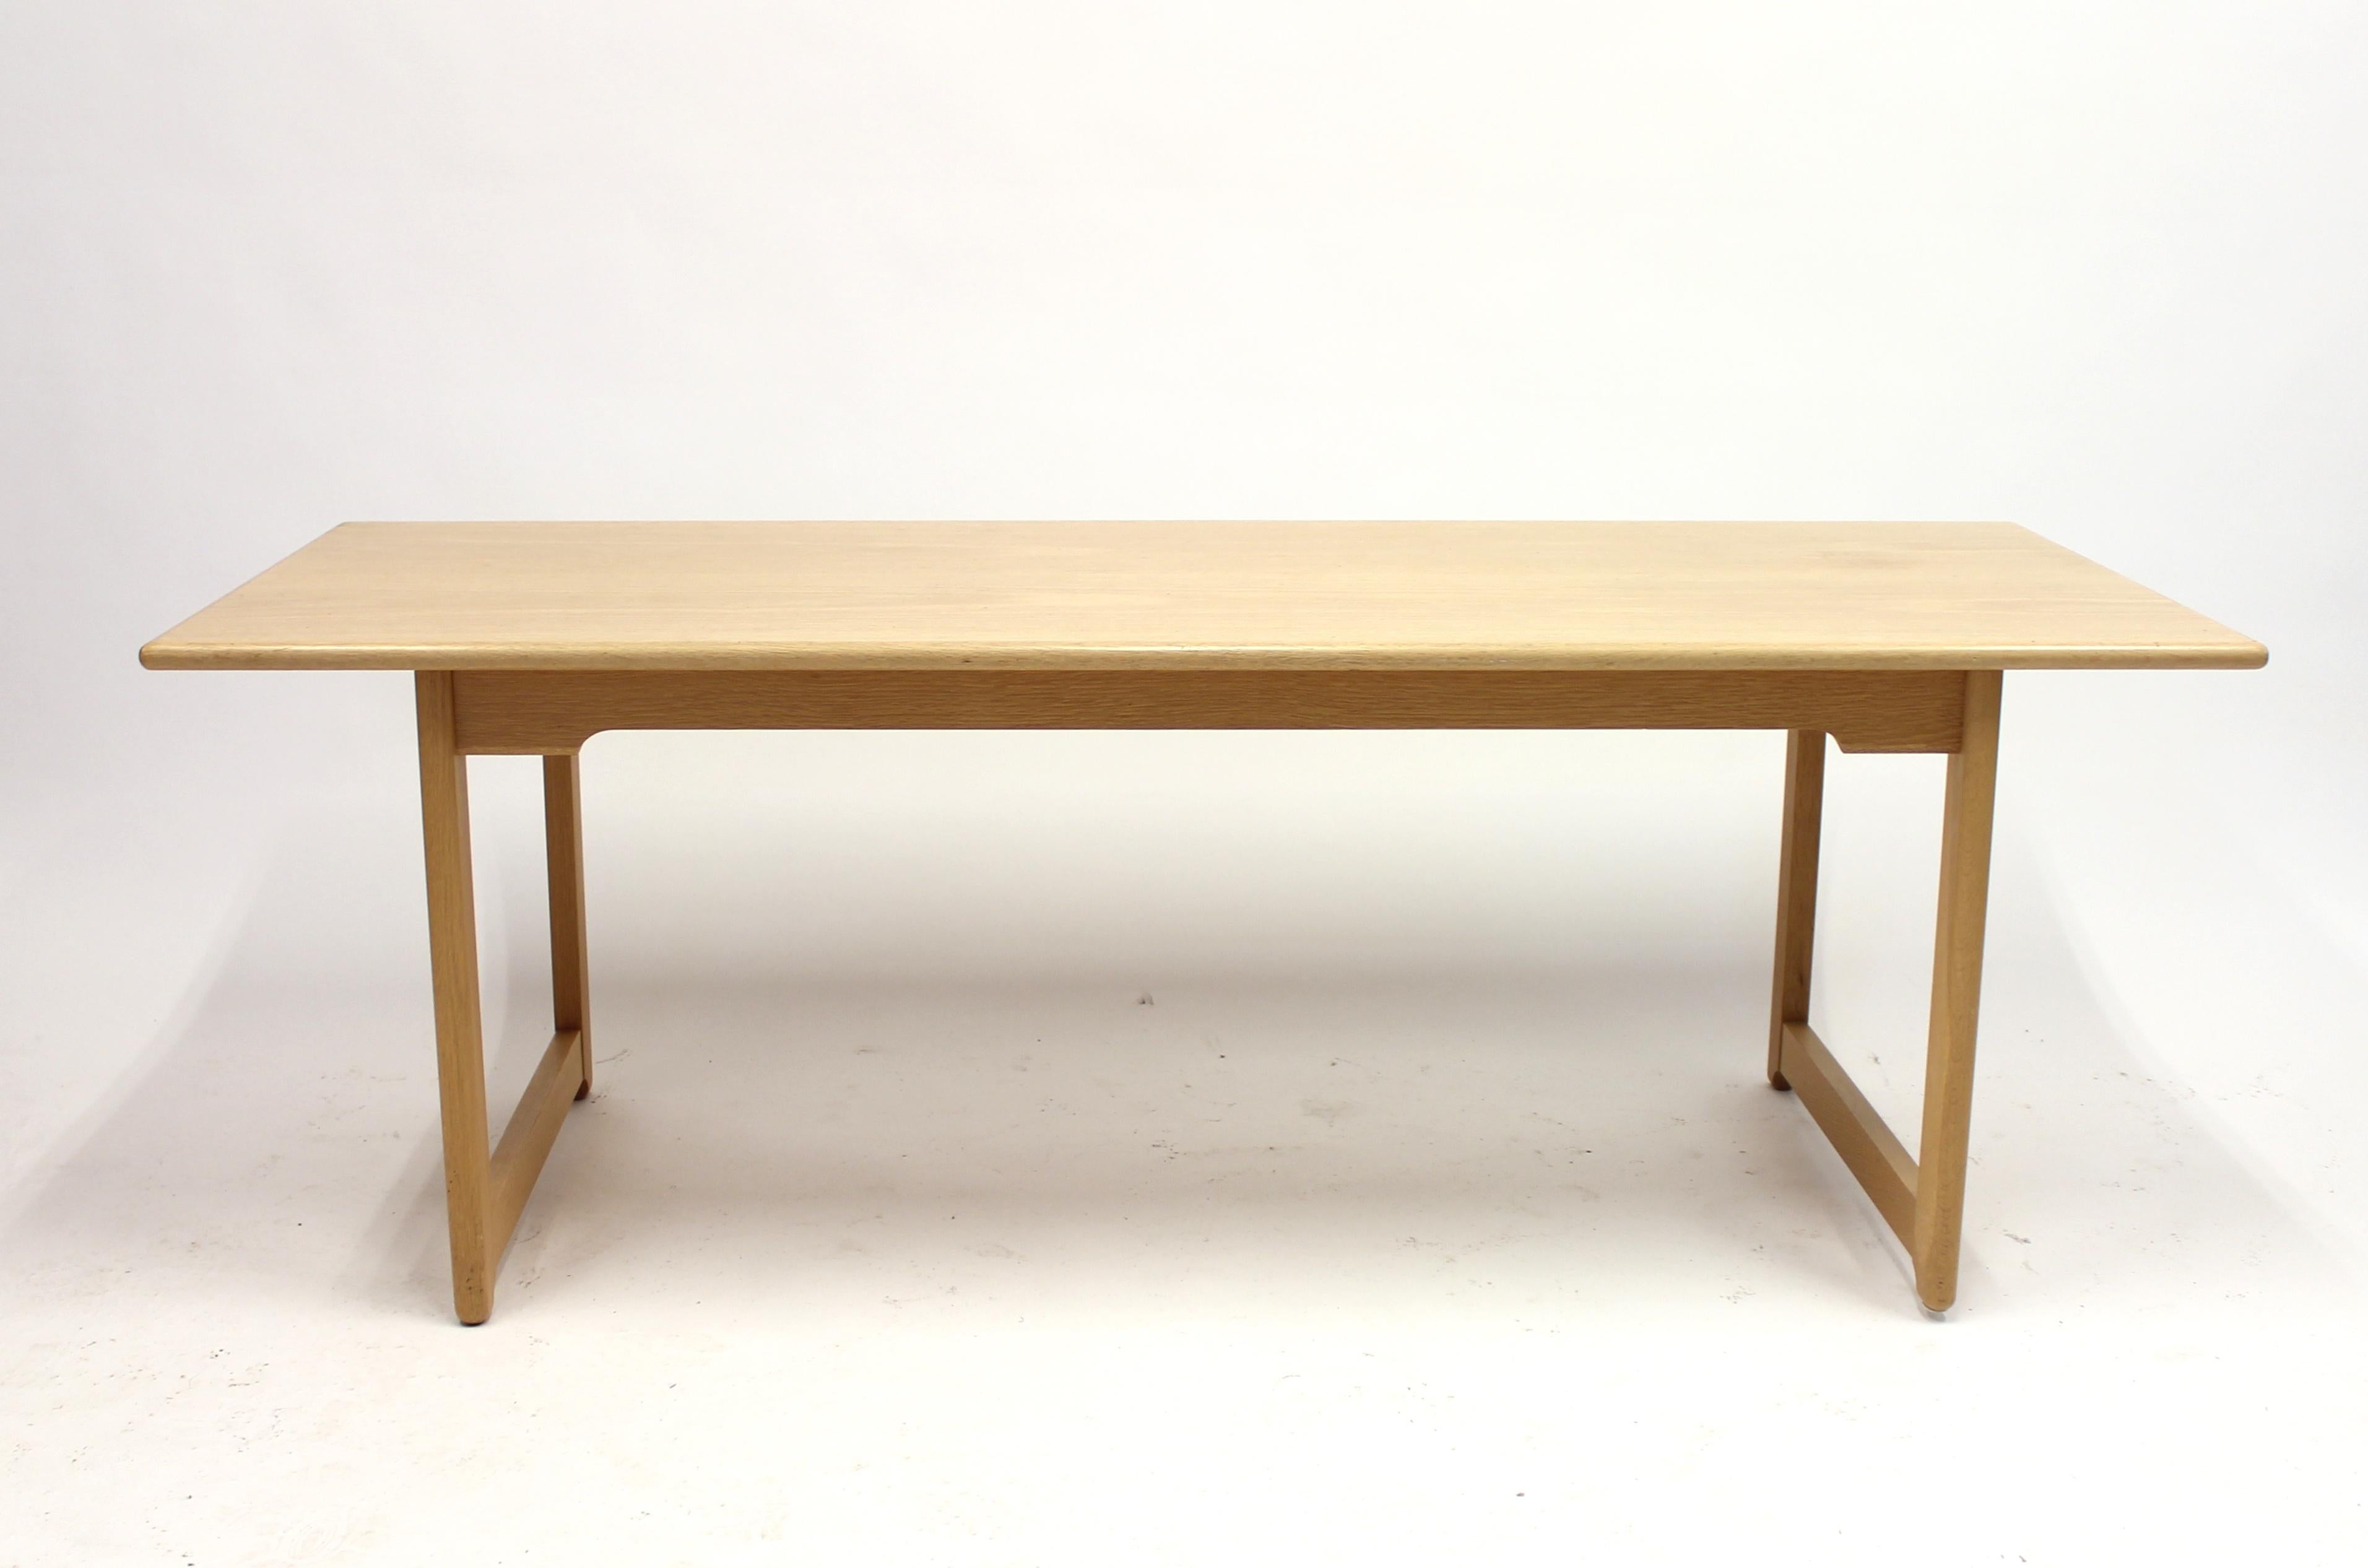 Oak coffee table designed by the dynamic duo Tove & Edvard Kindt-Larsen for AB Seffle Möbelfabrik for whom they designed numerous products for and had an extensive collaboration with for many years. Untouched original condition, some ware to